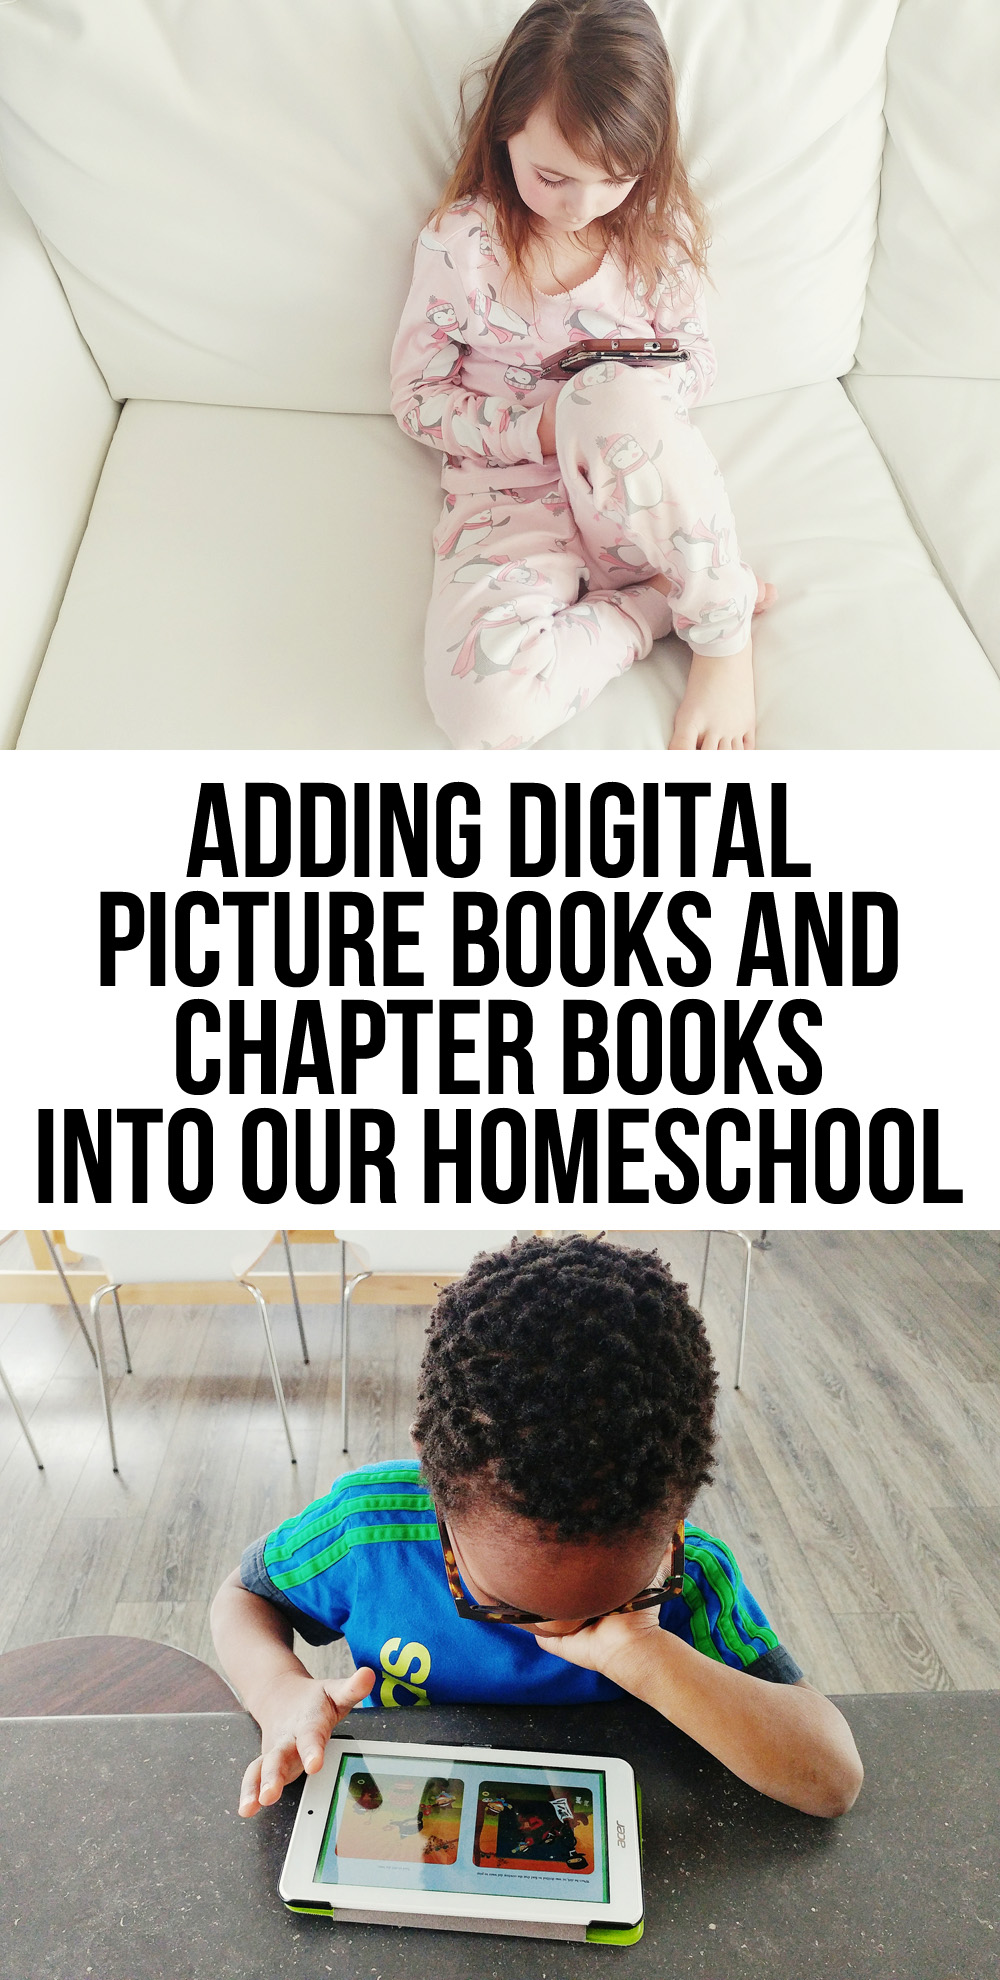 Adding Digital Picture Books and Chapter Books into Our Homeschool - what we love about ebooks in our homeschool.